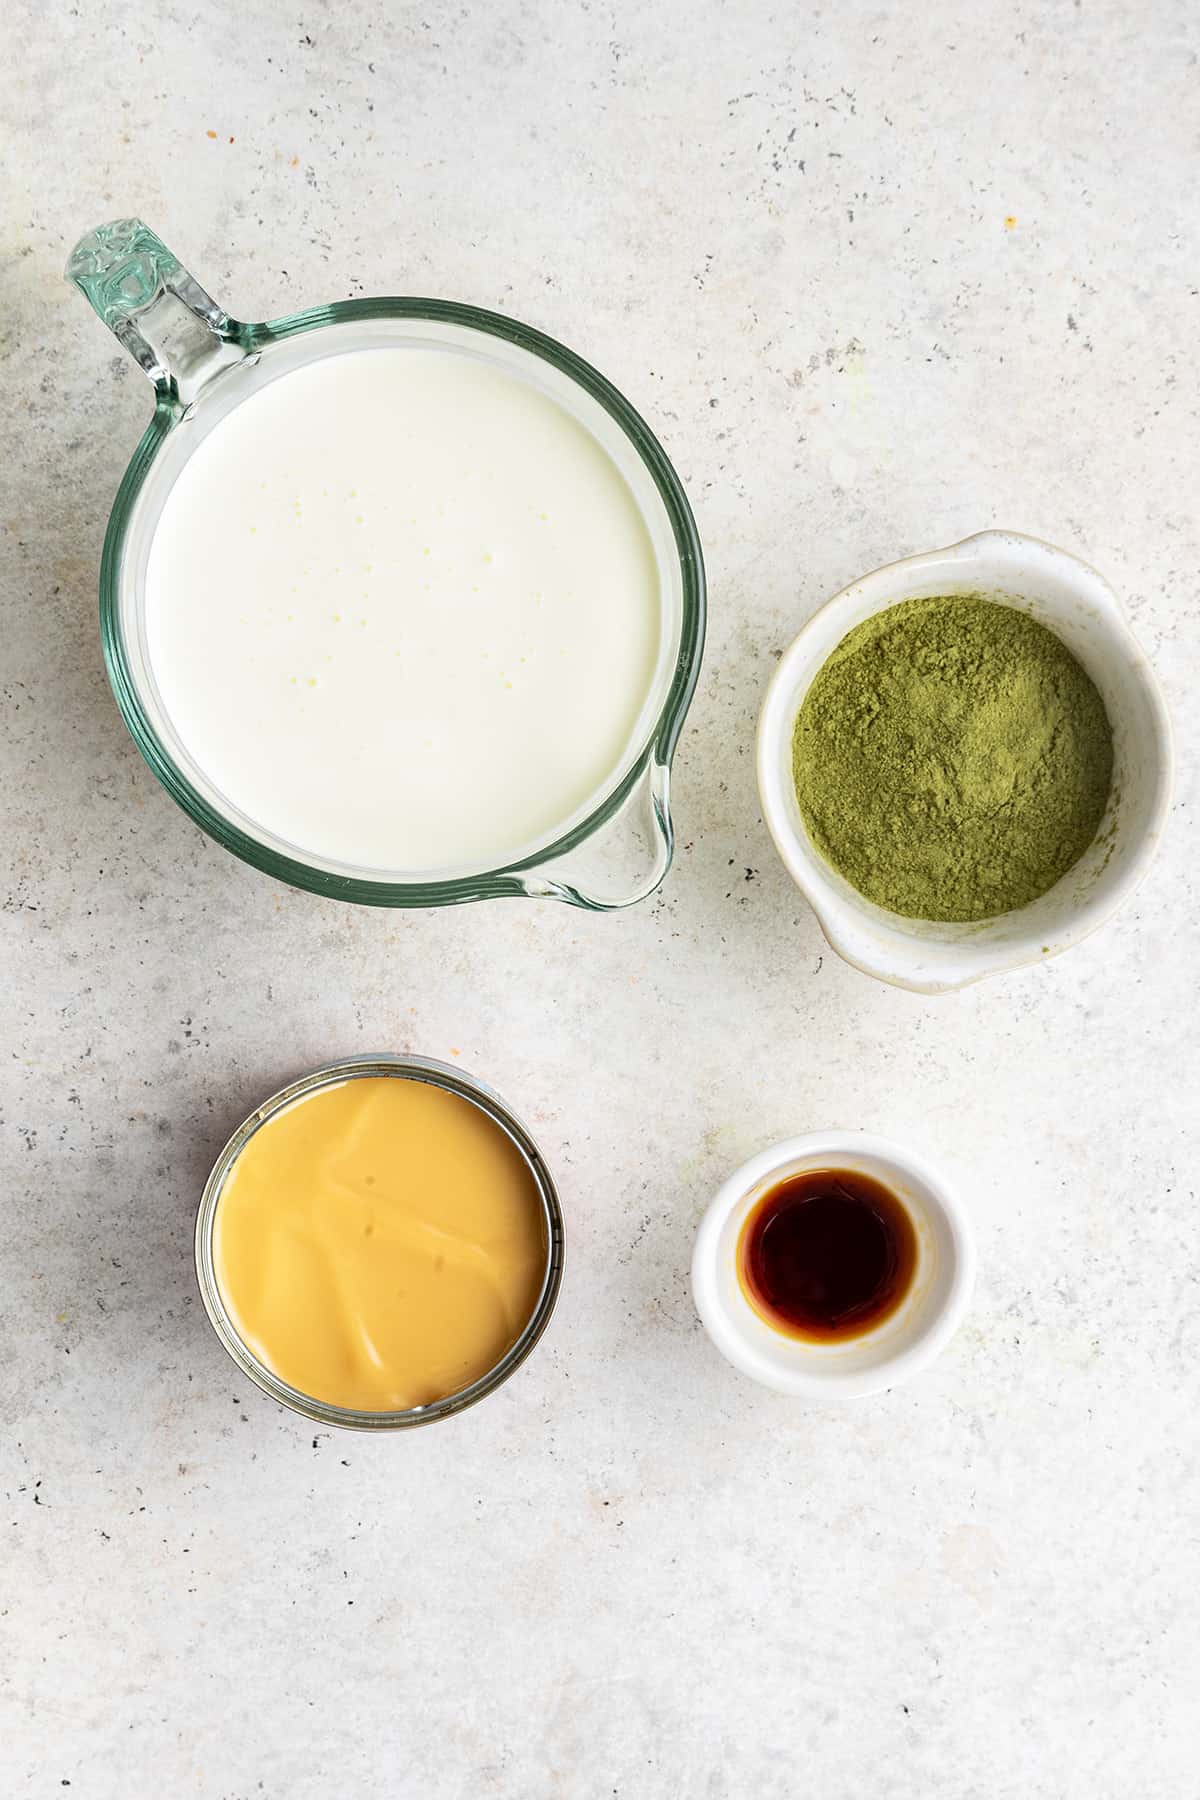 Overhead view of the ingredients needed for matcha ice cream: a bowl of vanilla extract, a bowl of matcha powder, a pyrex of whipping cream, and a can of condensed milk